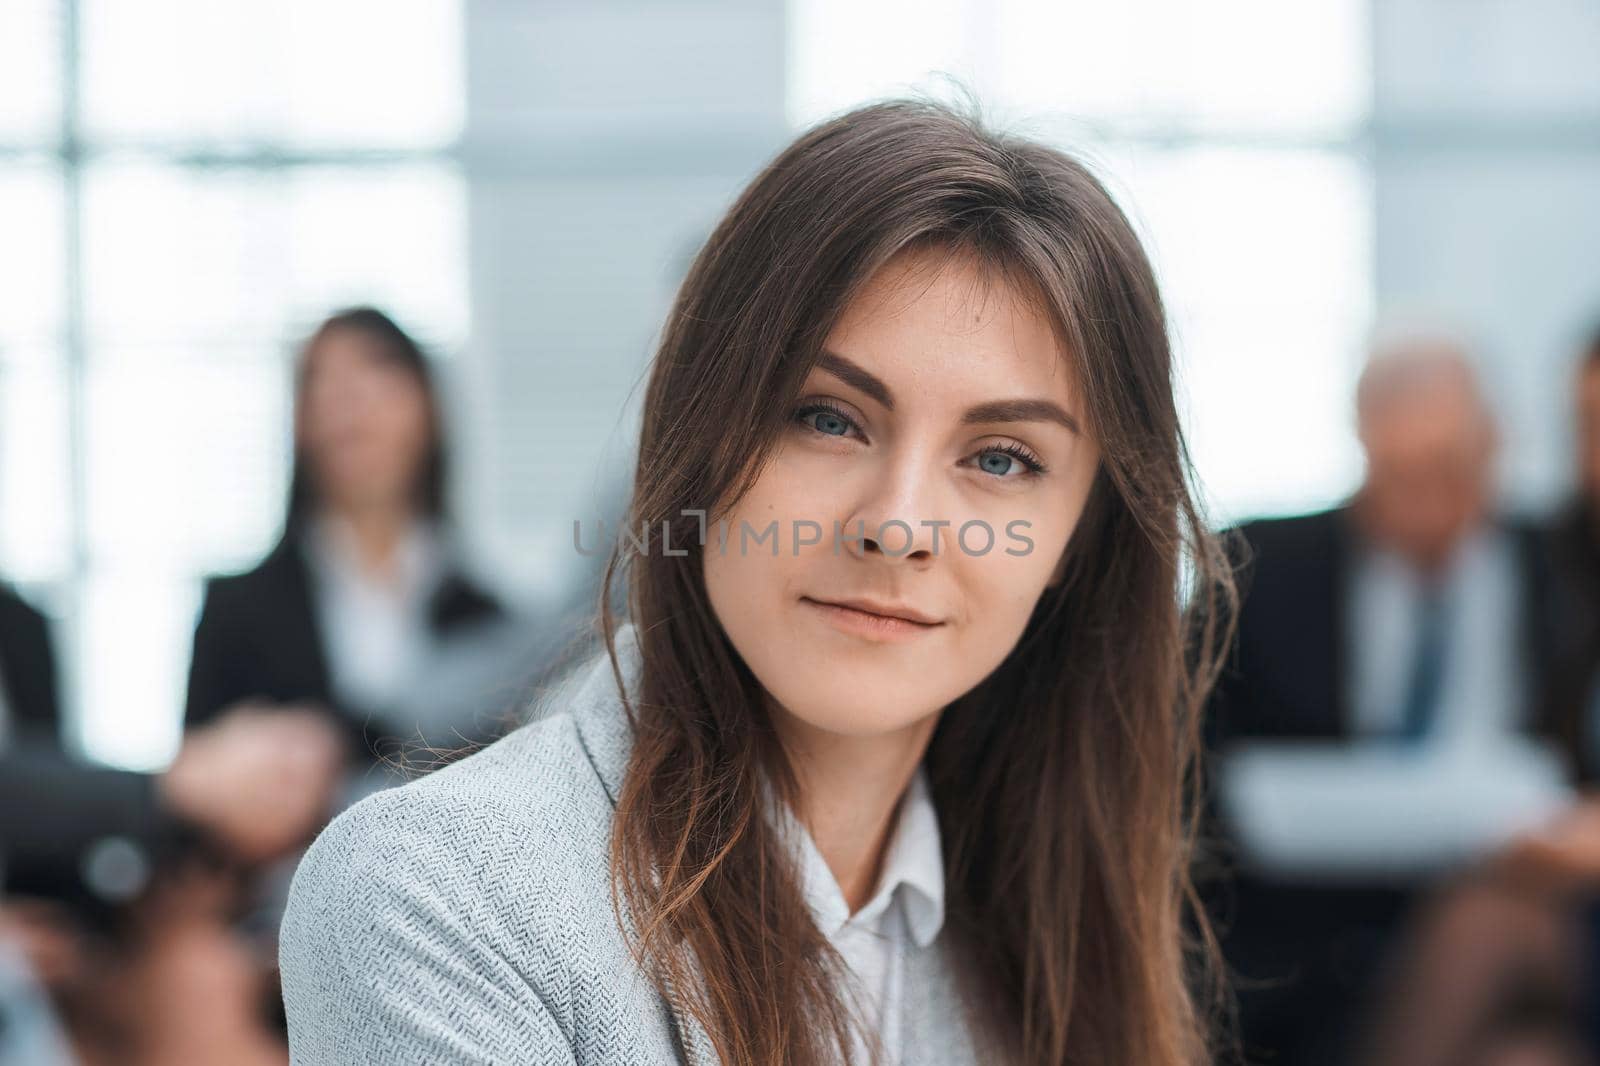 close up. confident young business woman sitting in office